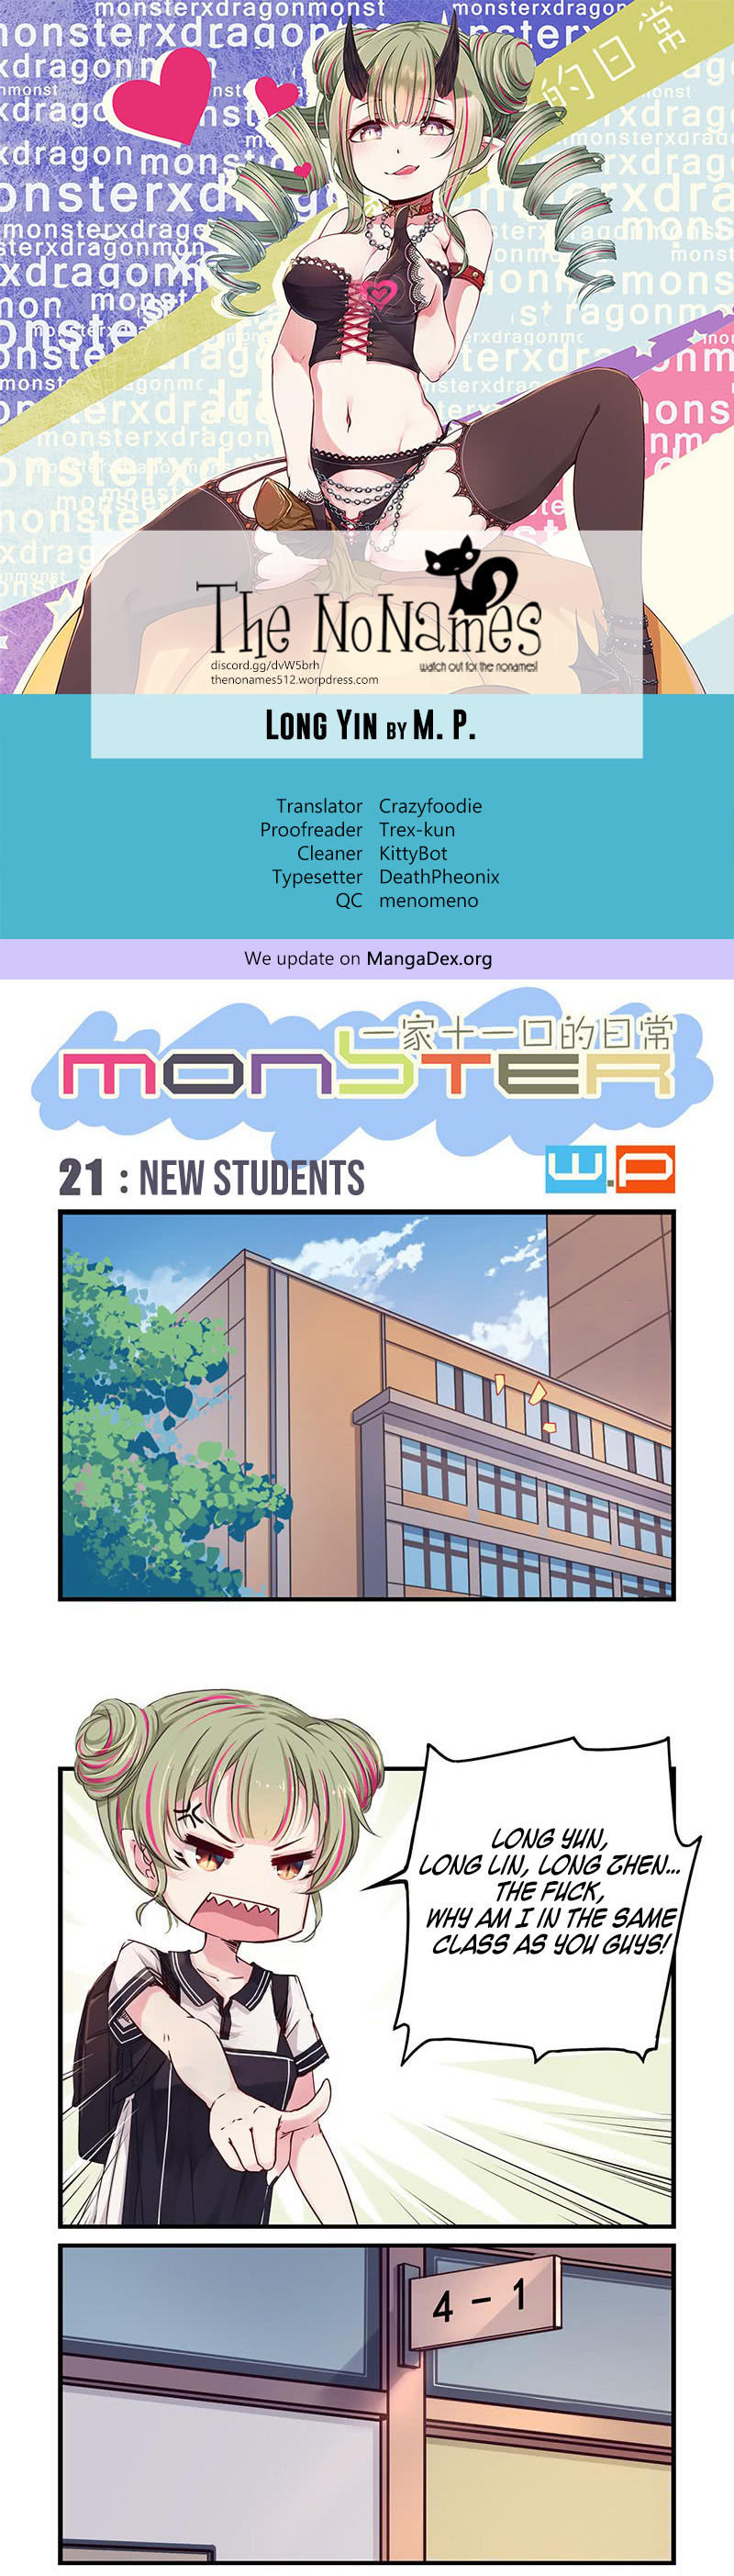 Long Yin - Monster Chapter 21: New Students